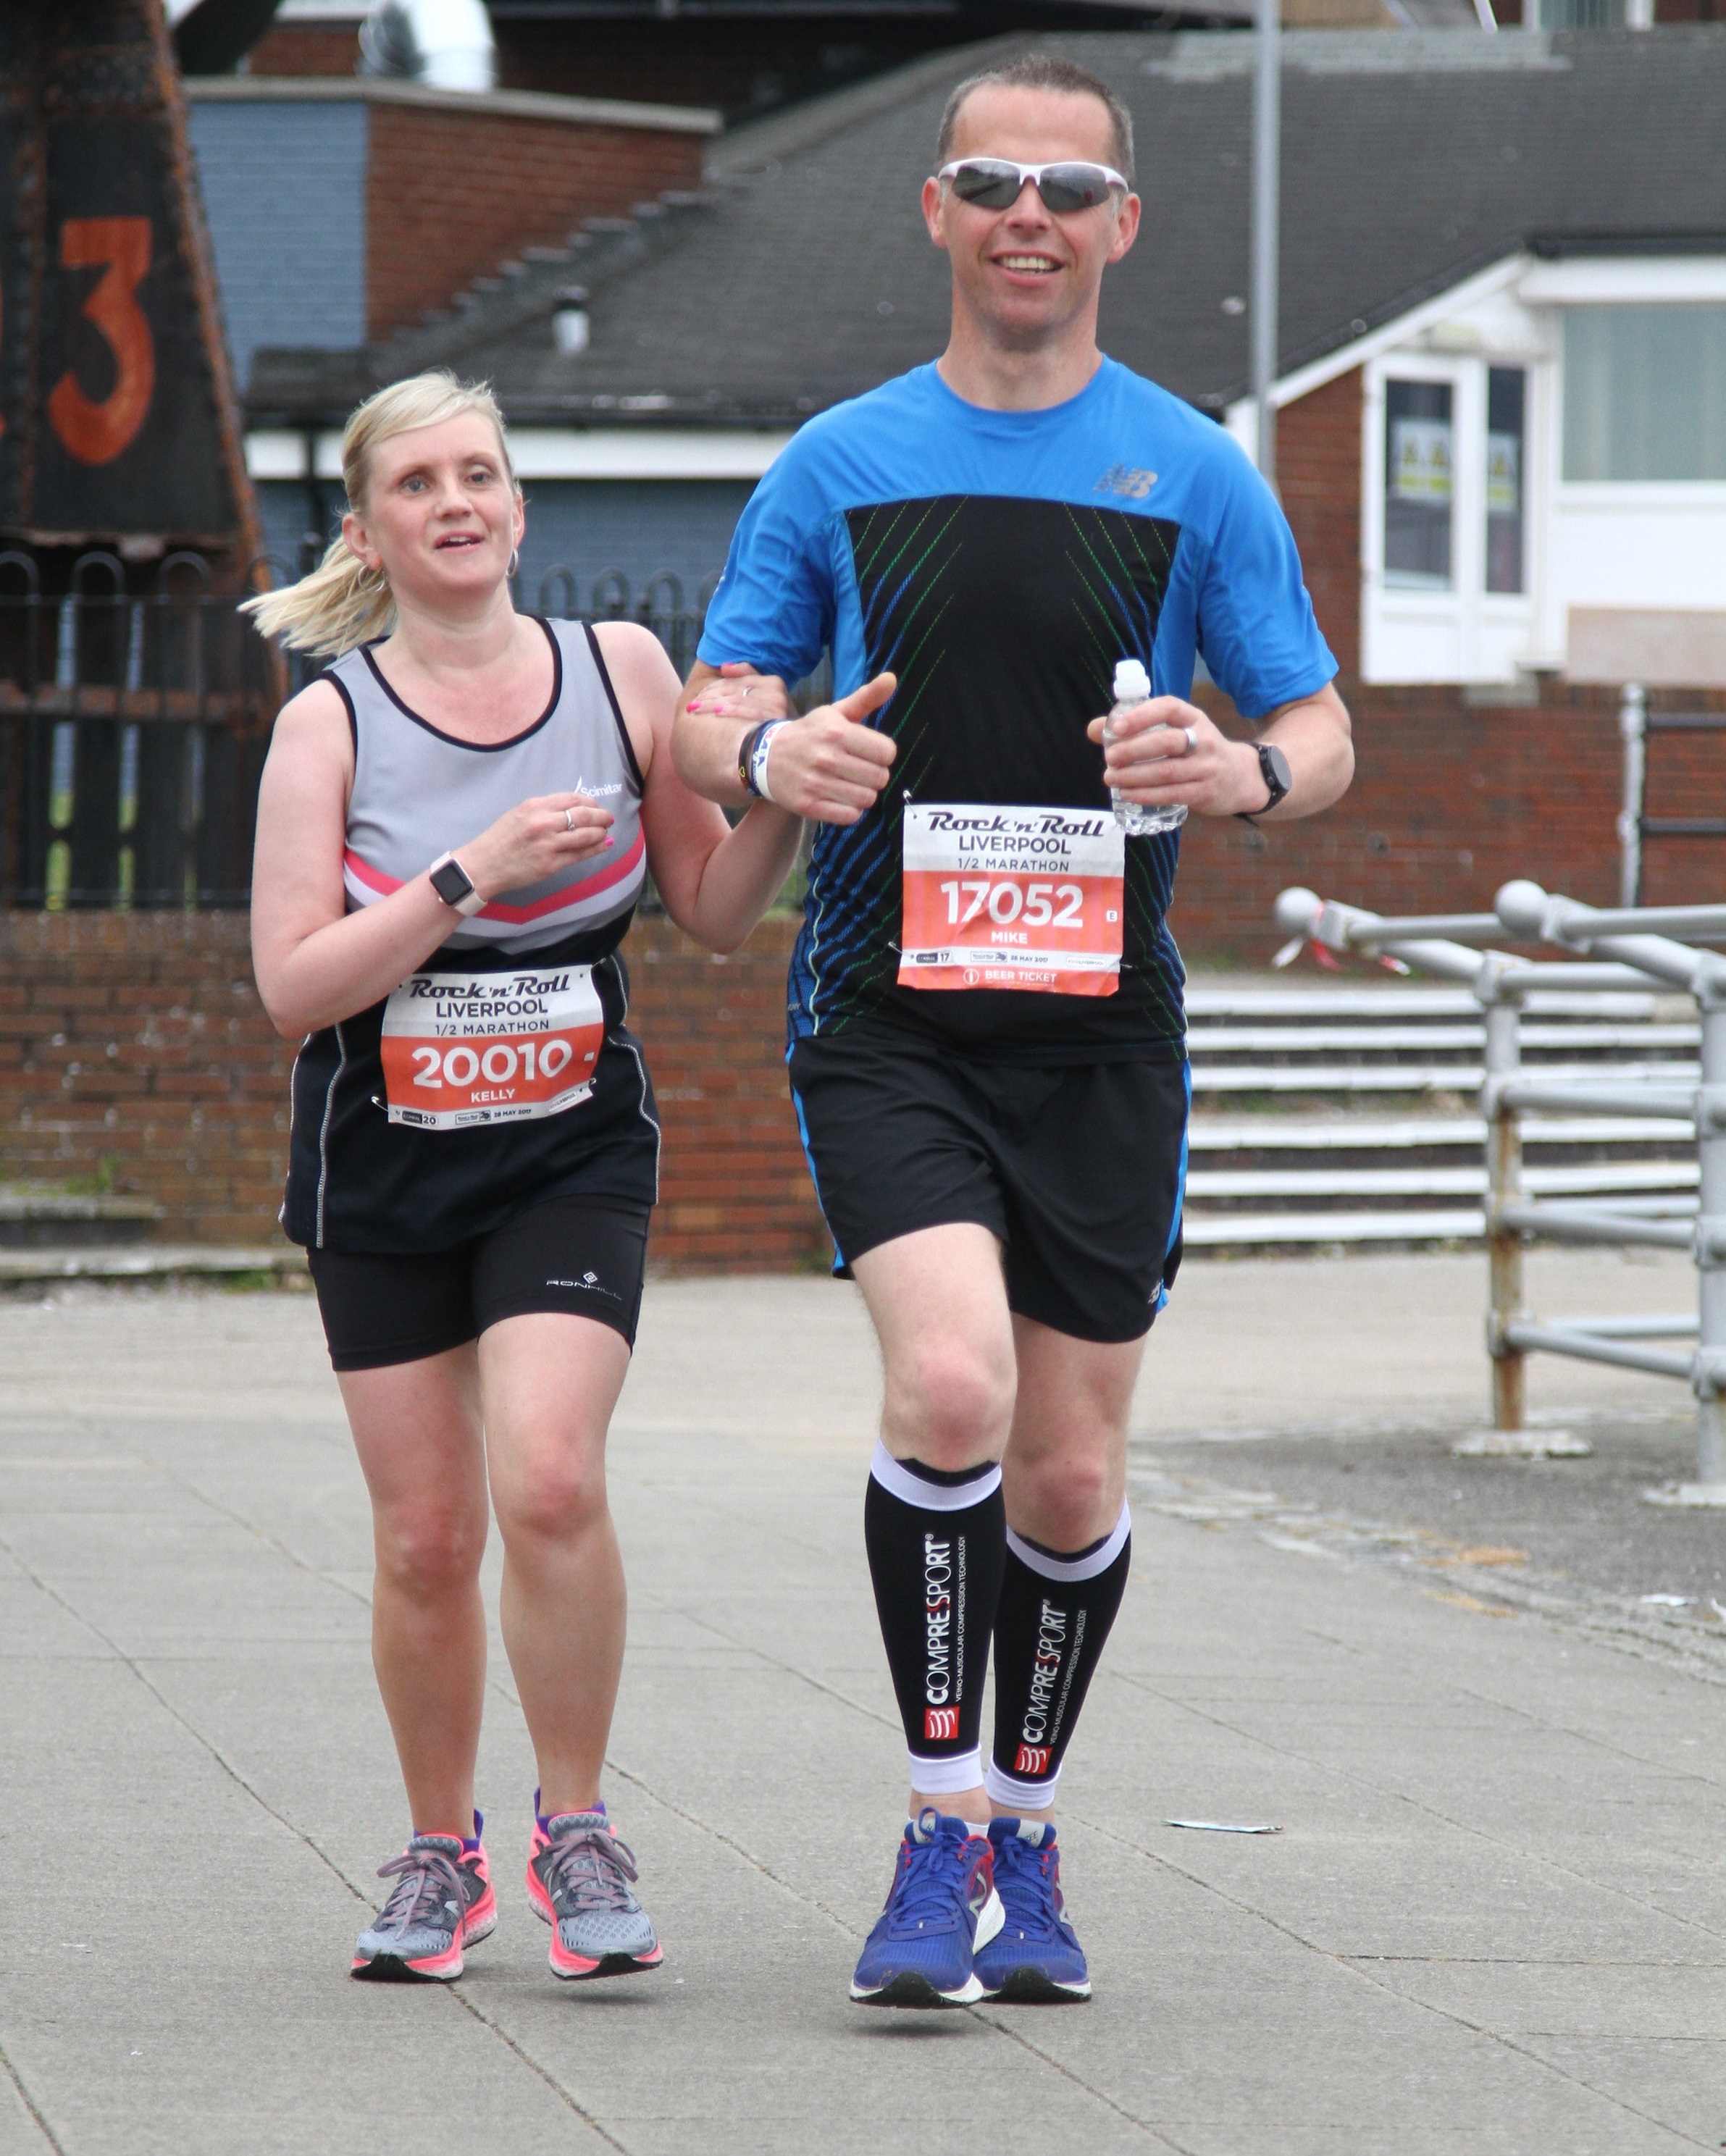 Kelly and guide Mike running the Liverpool Rock n Roll Half Marathon